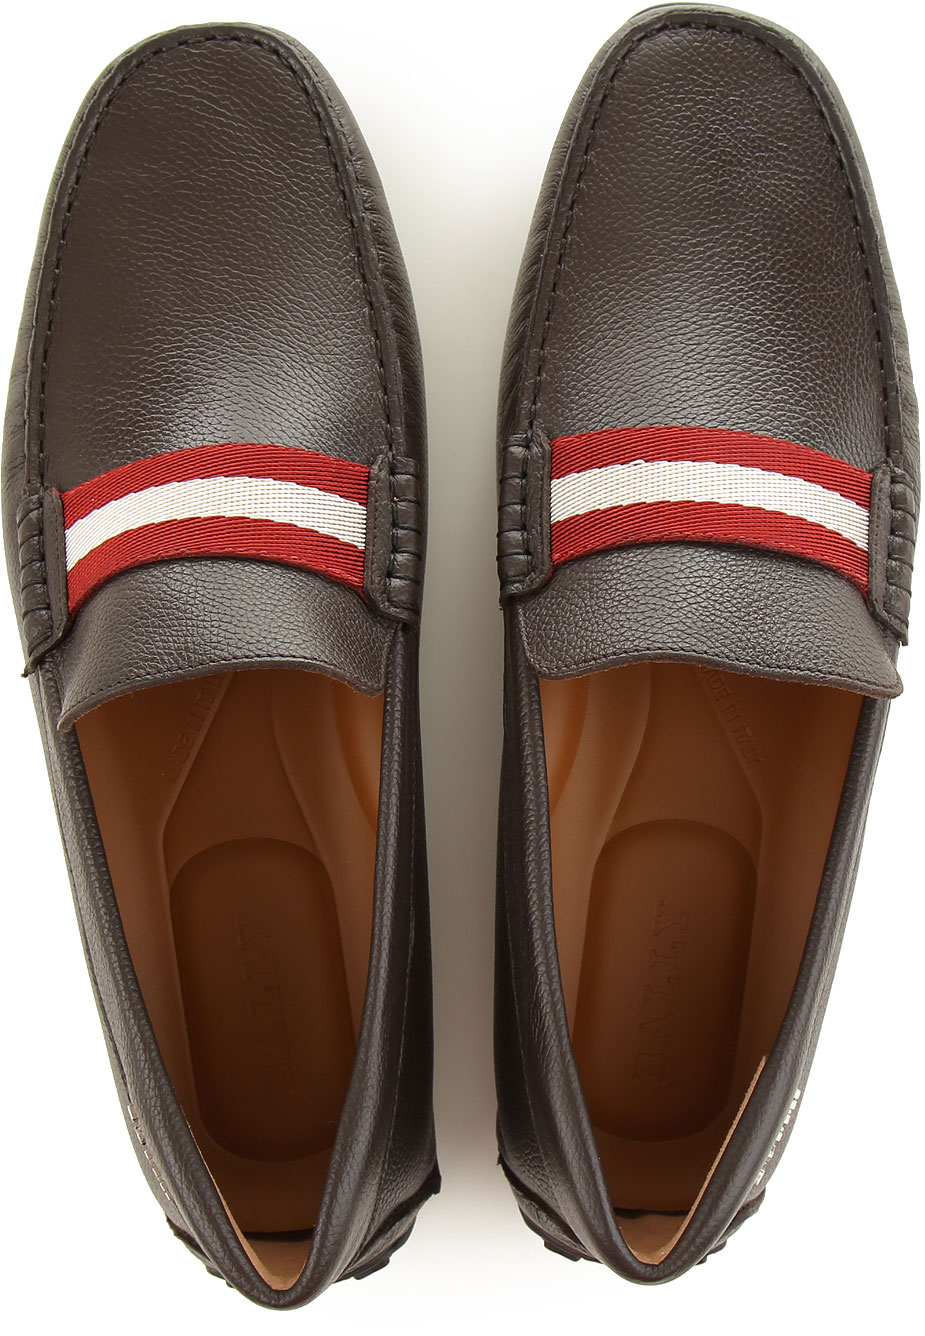 Mens Shoes Bally, Style code: 6206928-341-pearce